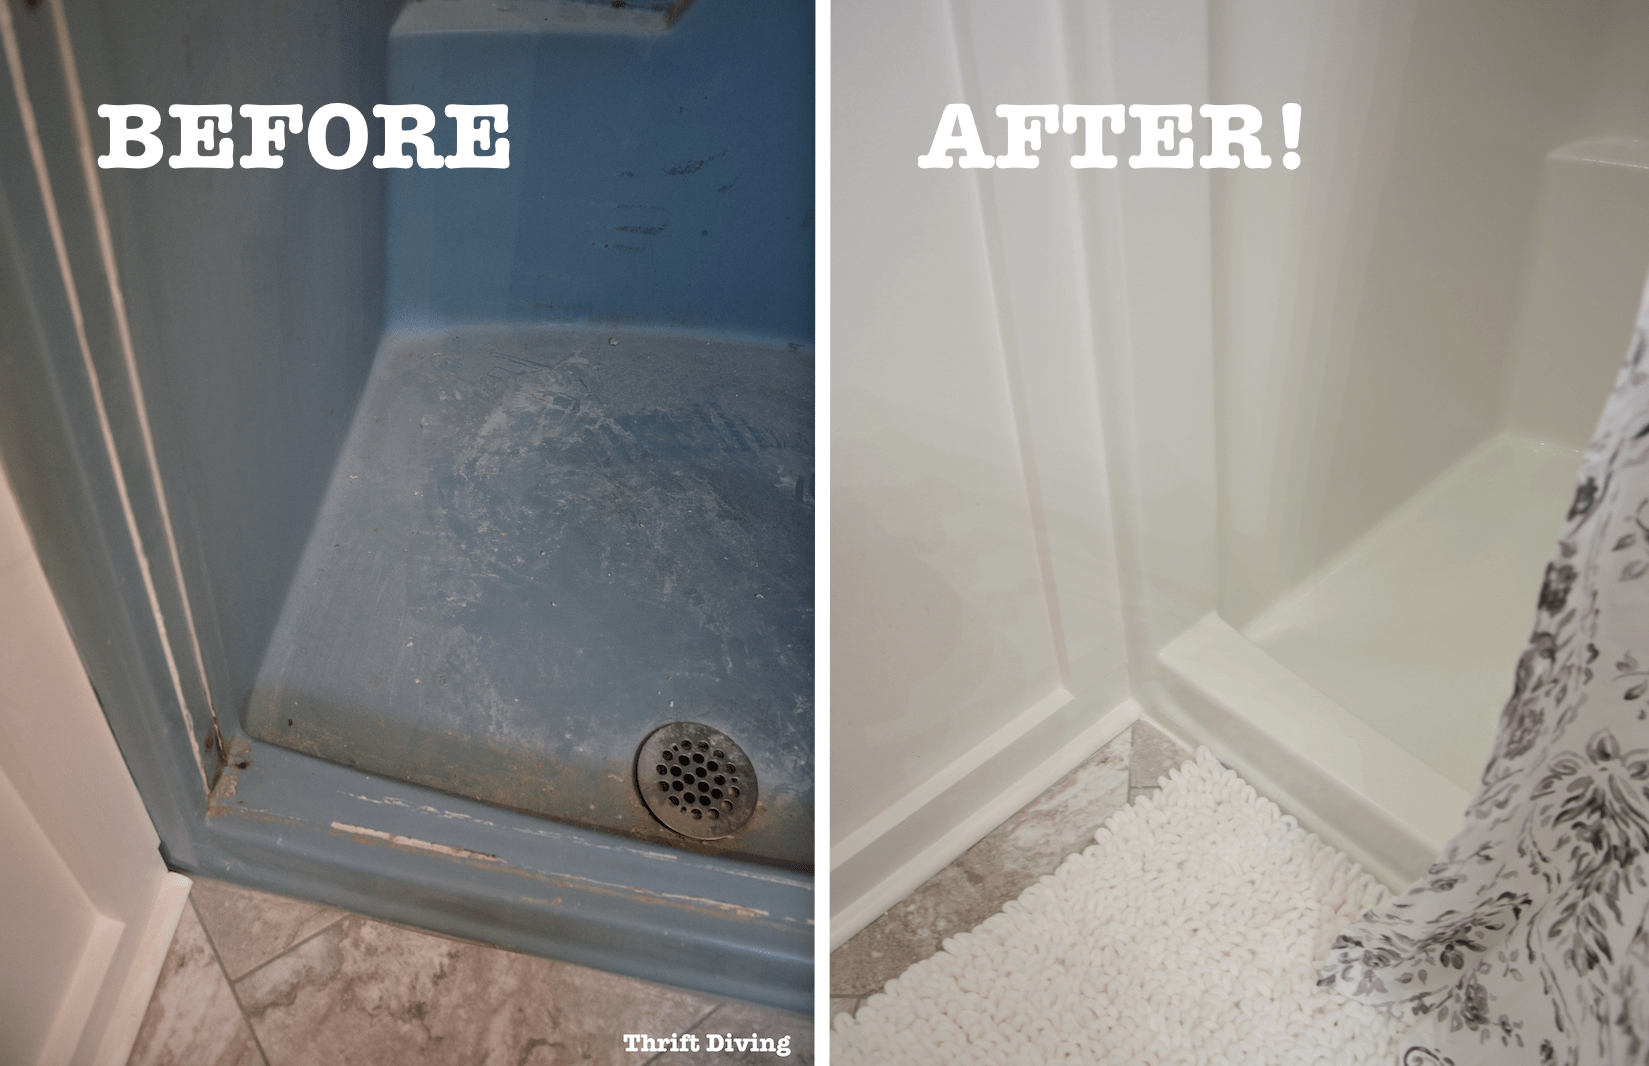 Shower and tub refinishing: save money when making over your bathroom by painting your tub or shower! Here's how to do it.